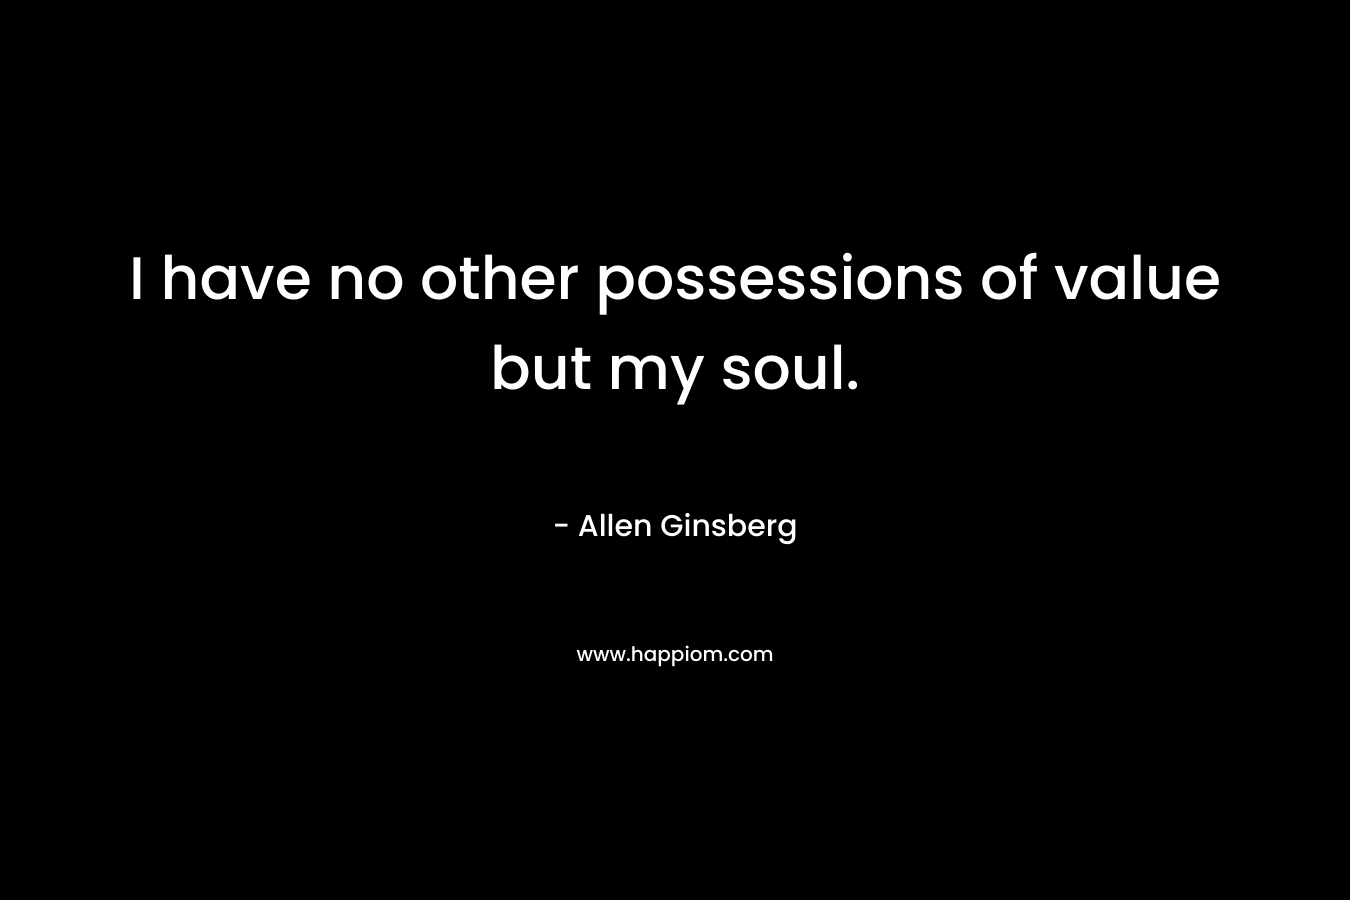 I have no other possessions of value but my soul. – Allen Ginsberg